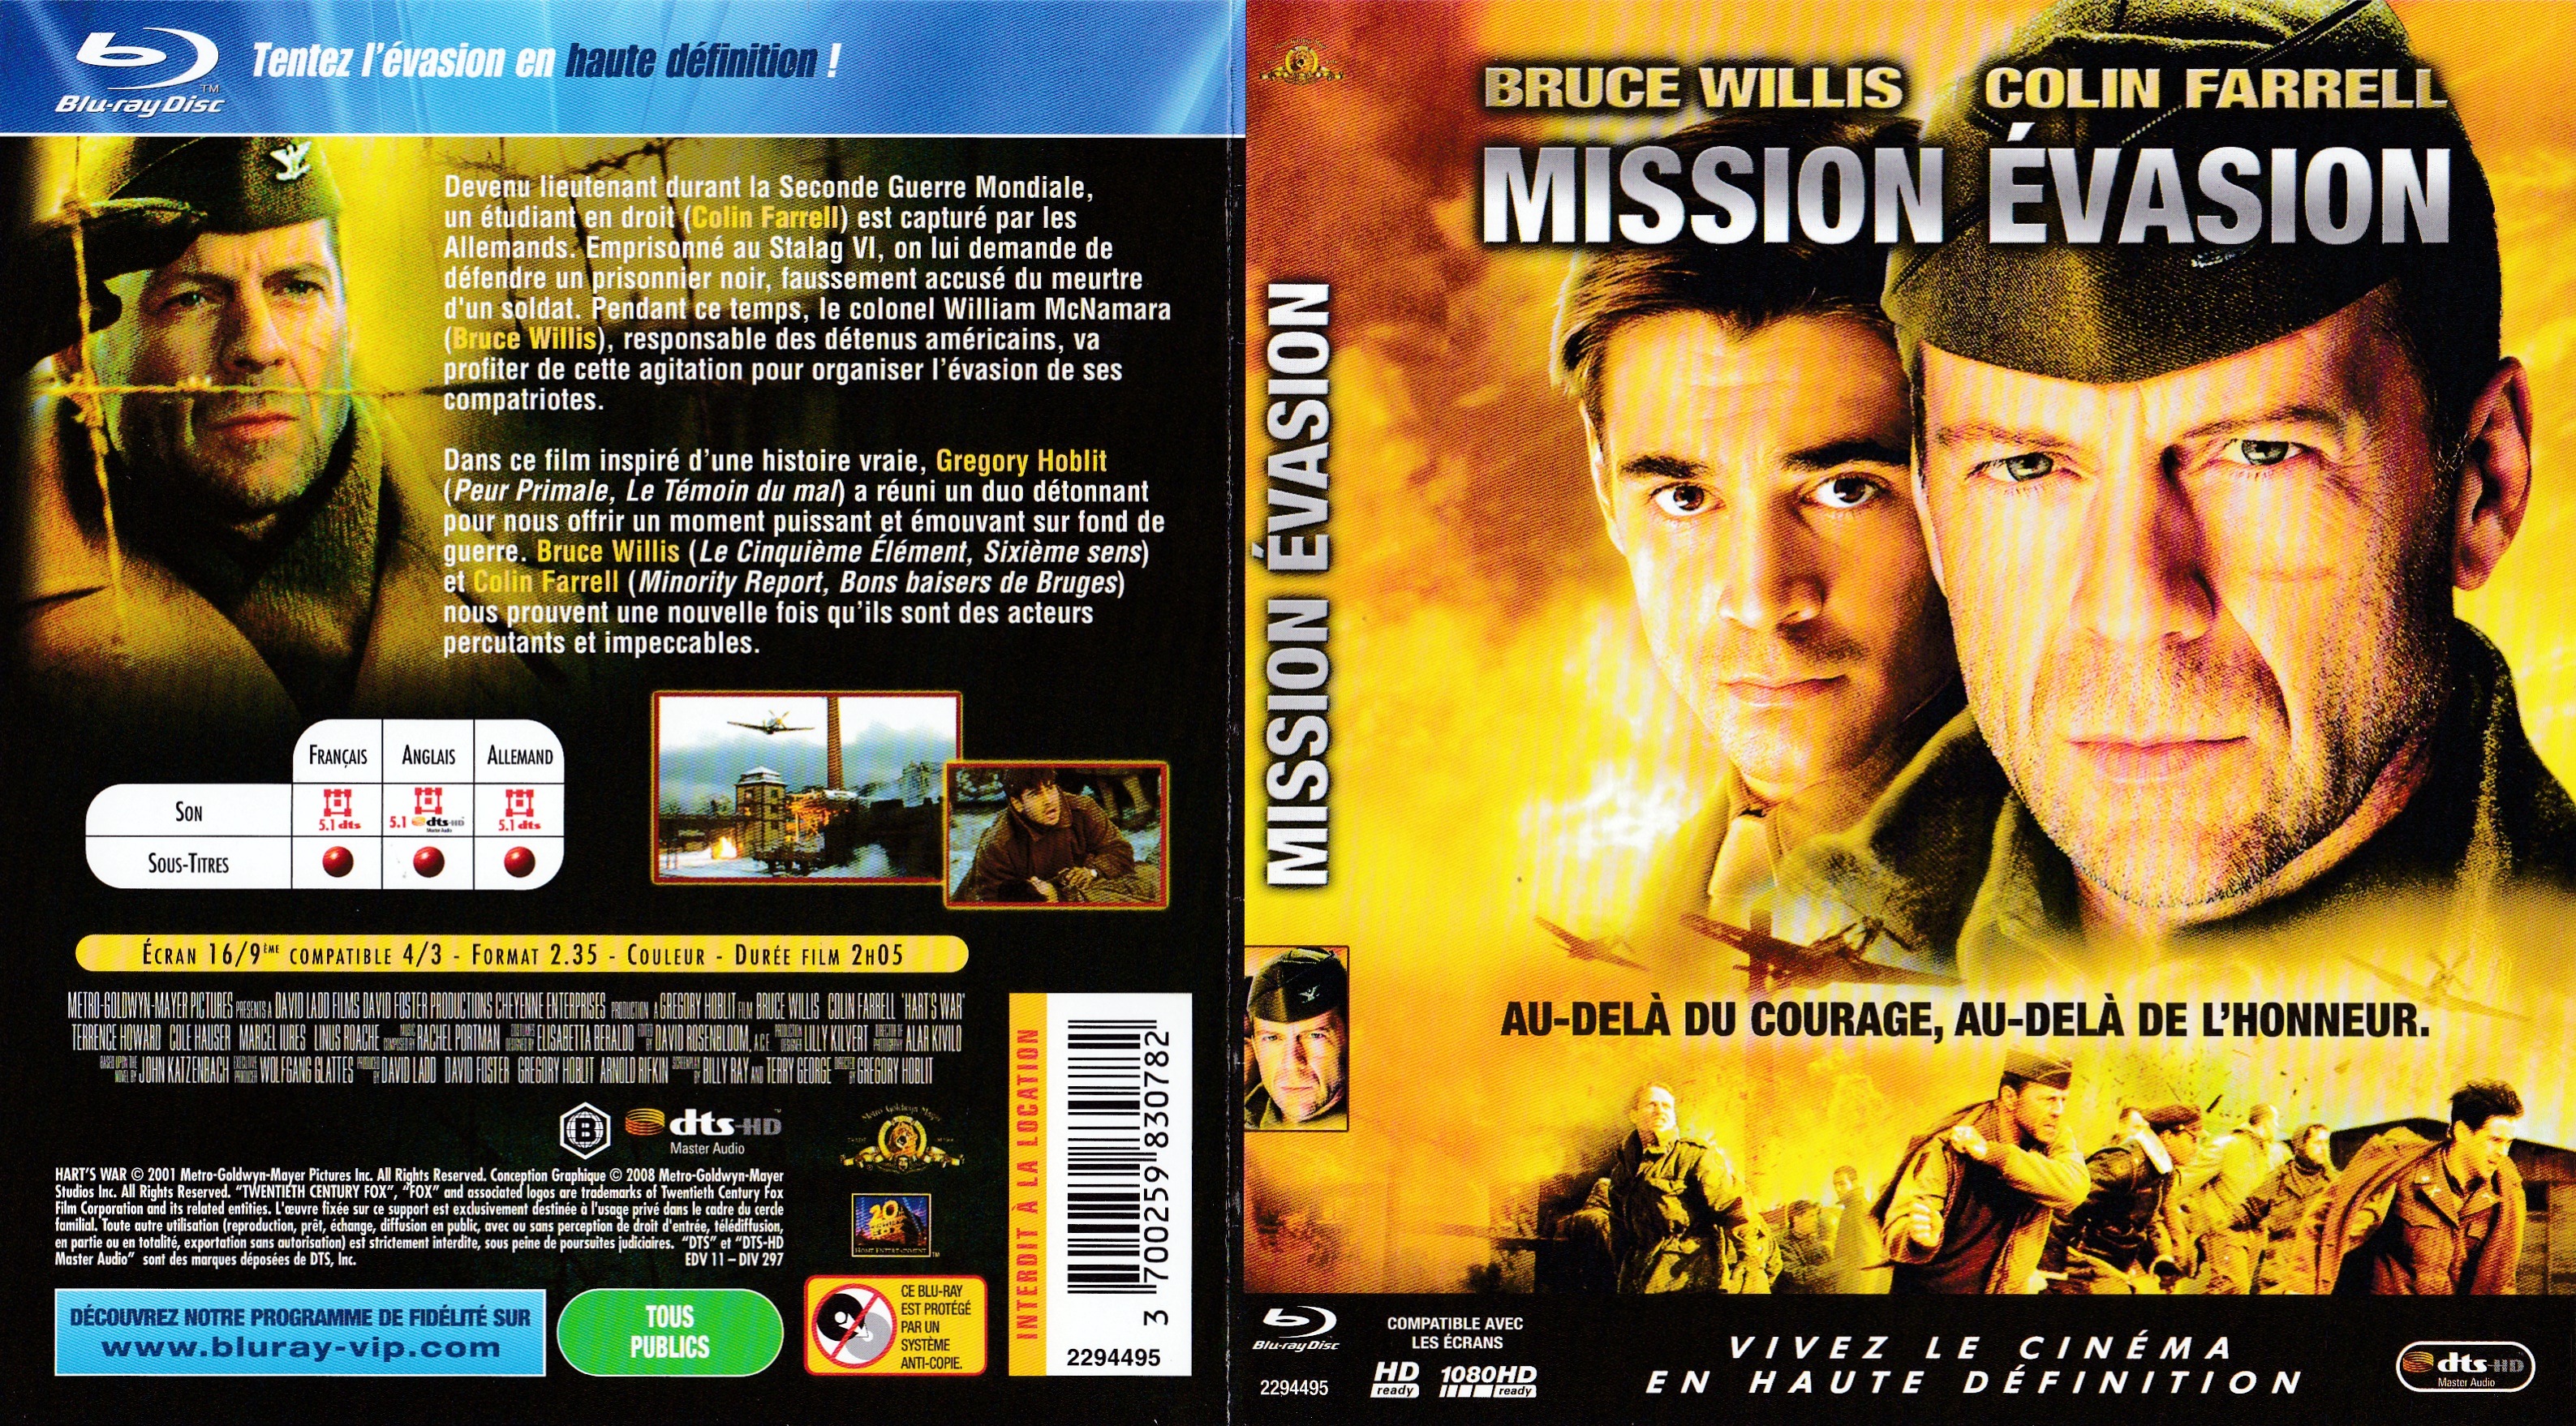 Jaquette DVD Mission evasion (BLU-RAY)